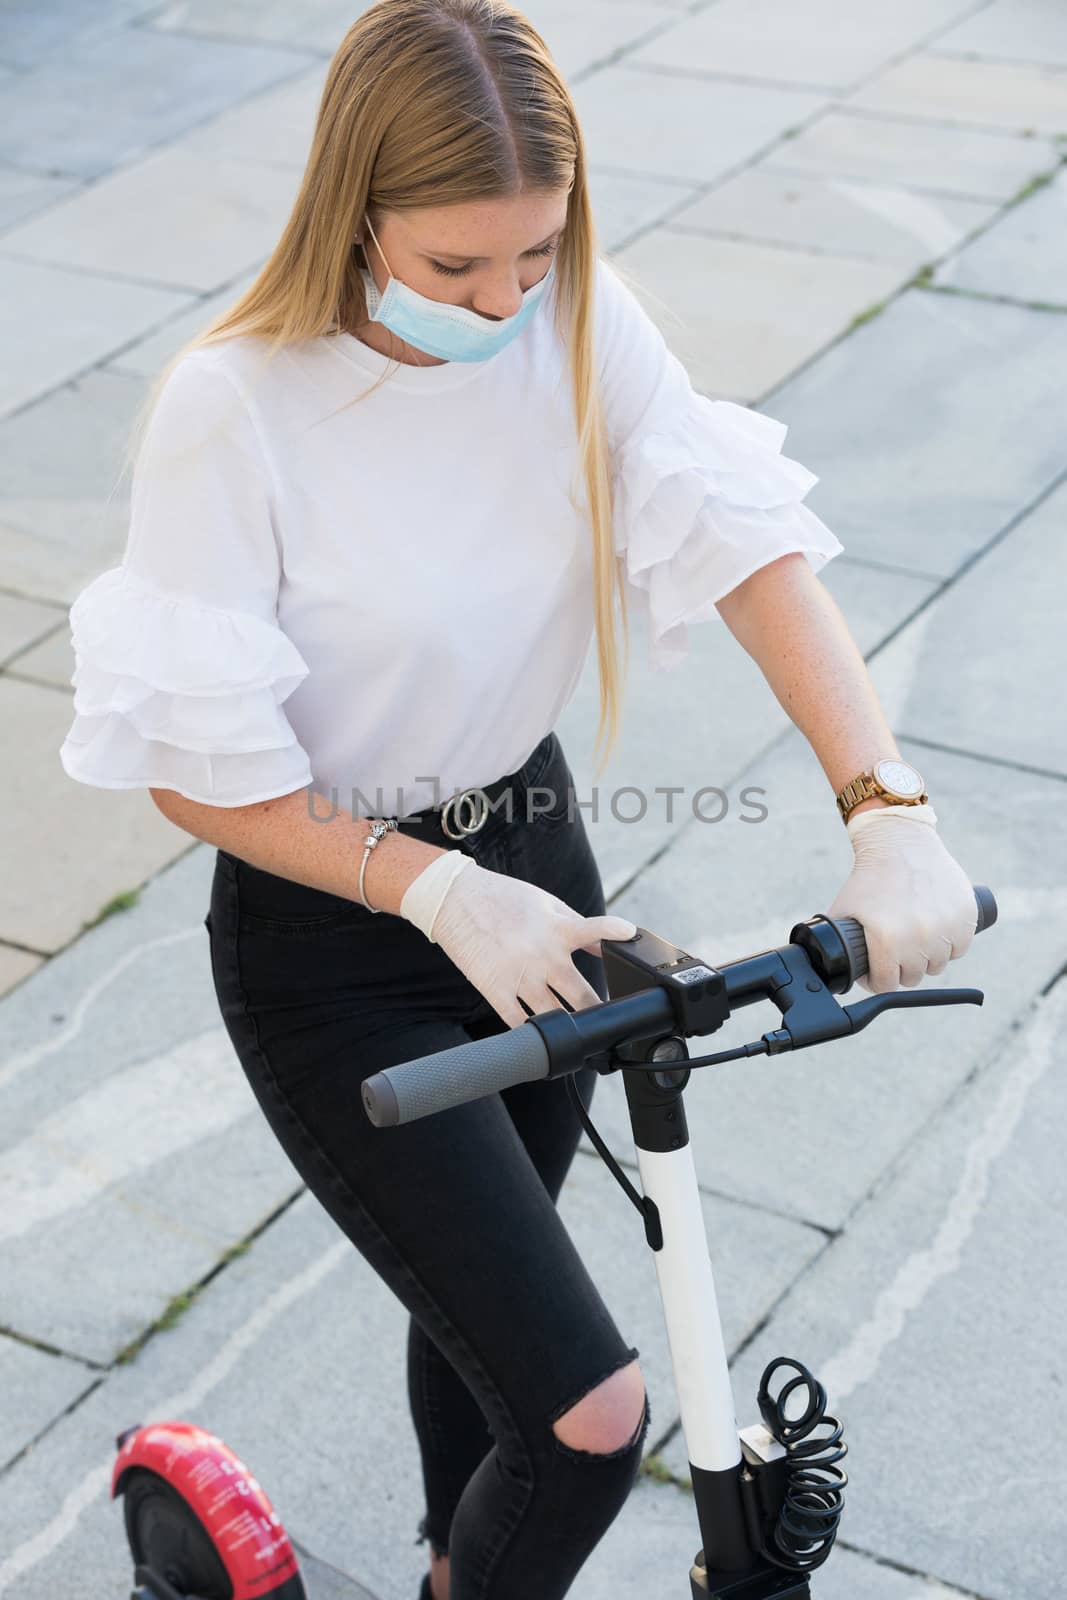 Trendy fashinable girl wearing corona virus protective face mask and rubber gloves while using rental electric scooters in city environment. Eco-friendly city transport in Ljubljana, Slovenia by kasto